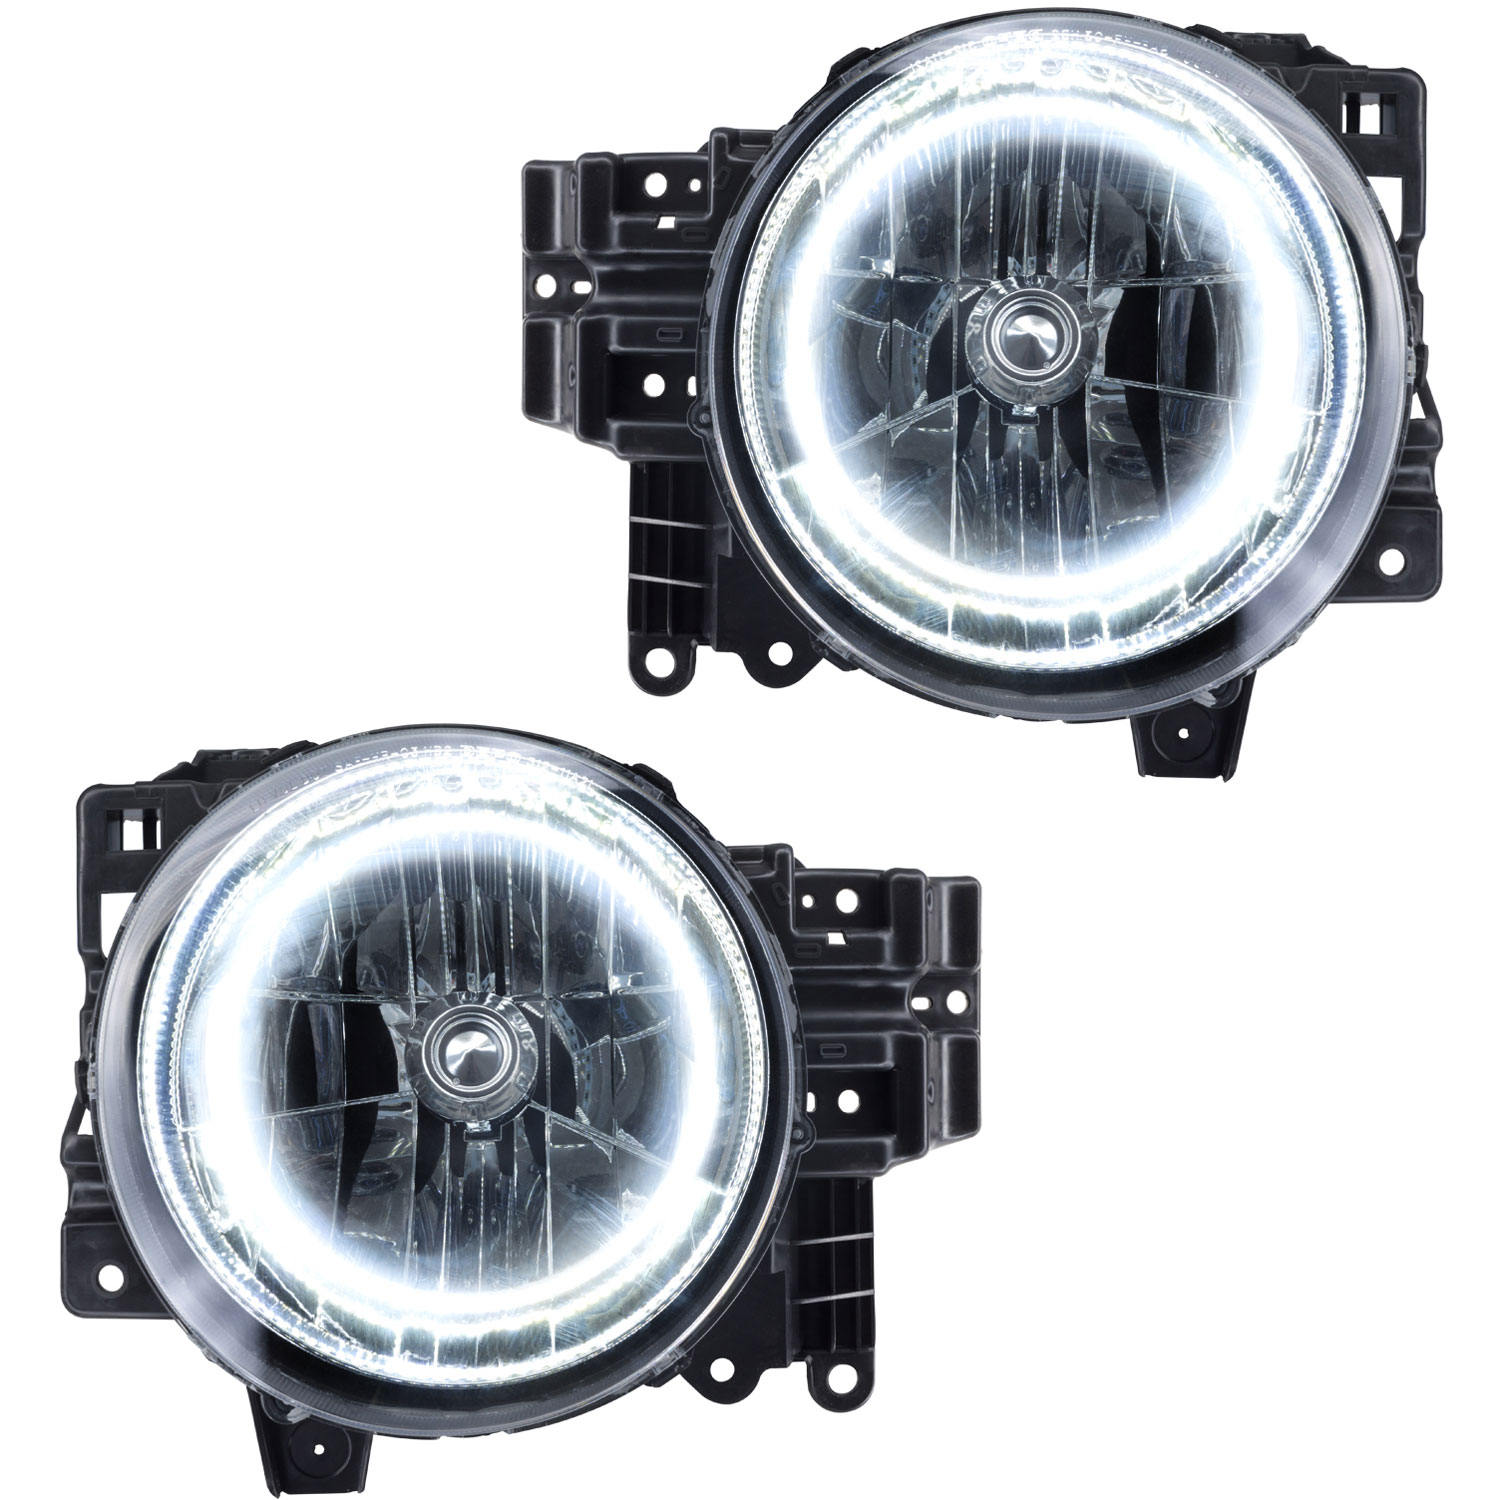 LED HALO Headlight Assembly Comes with preinstalled white LED Halos